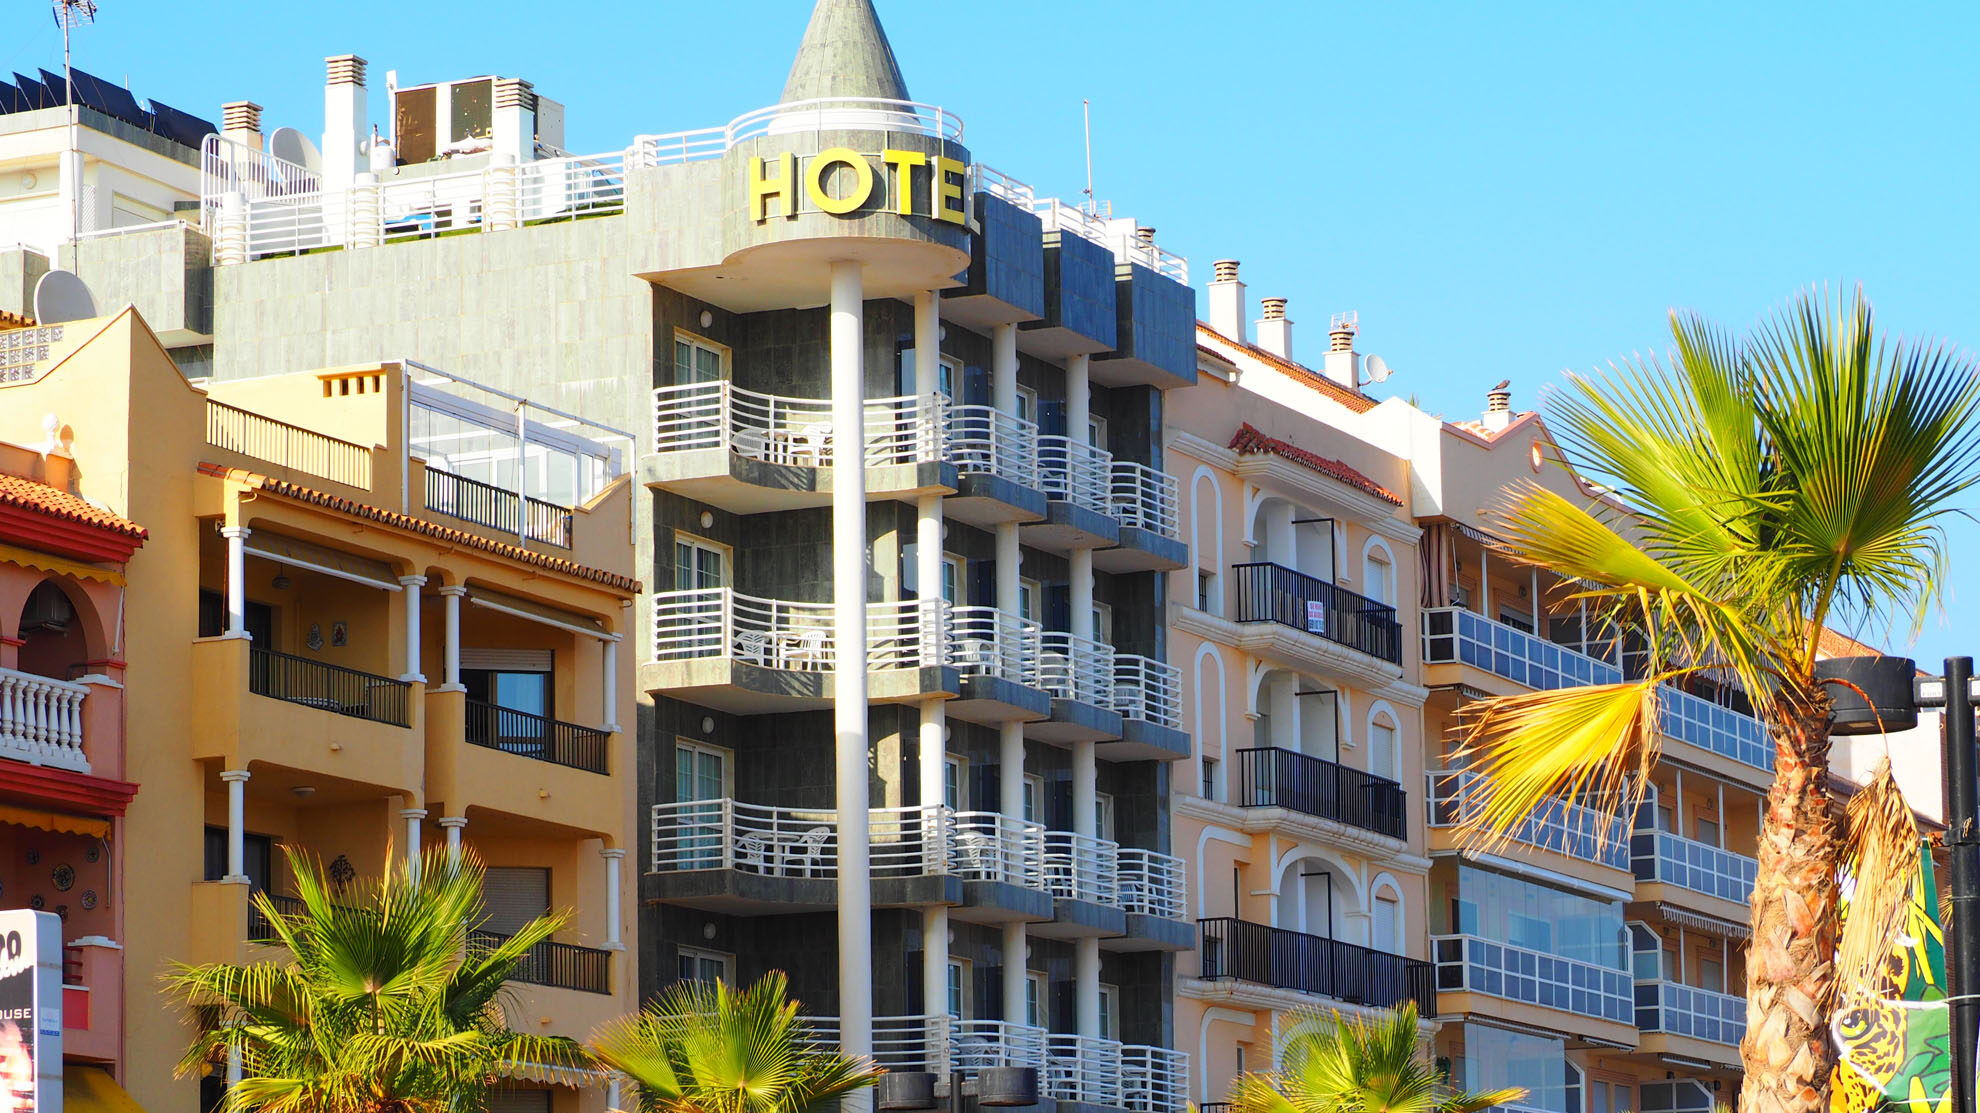 Good and affordable hotel in Fuengirola